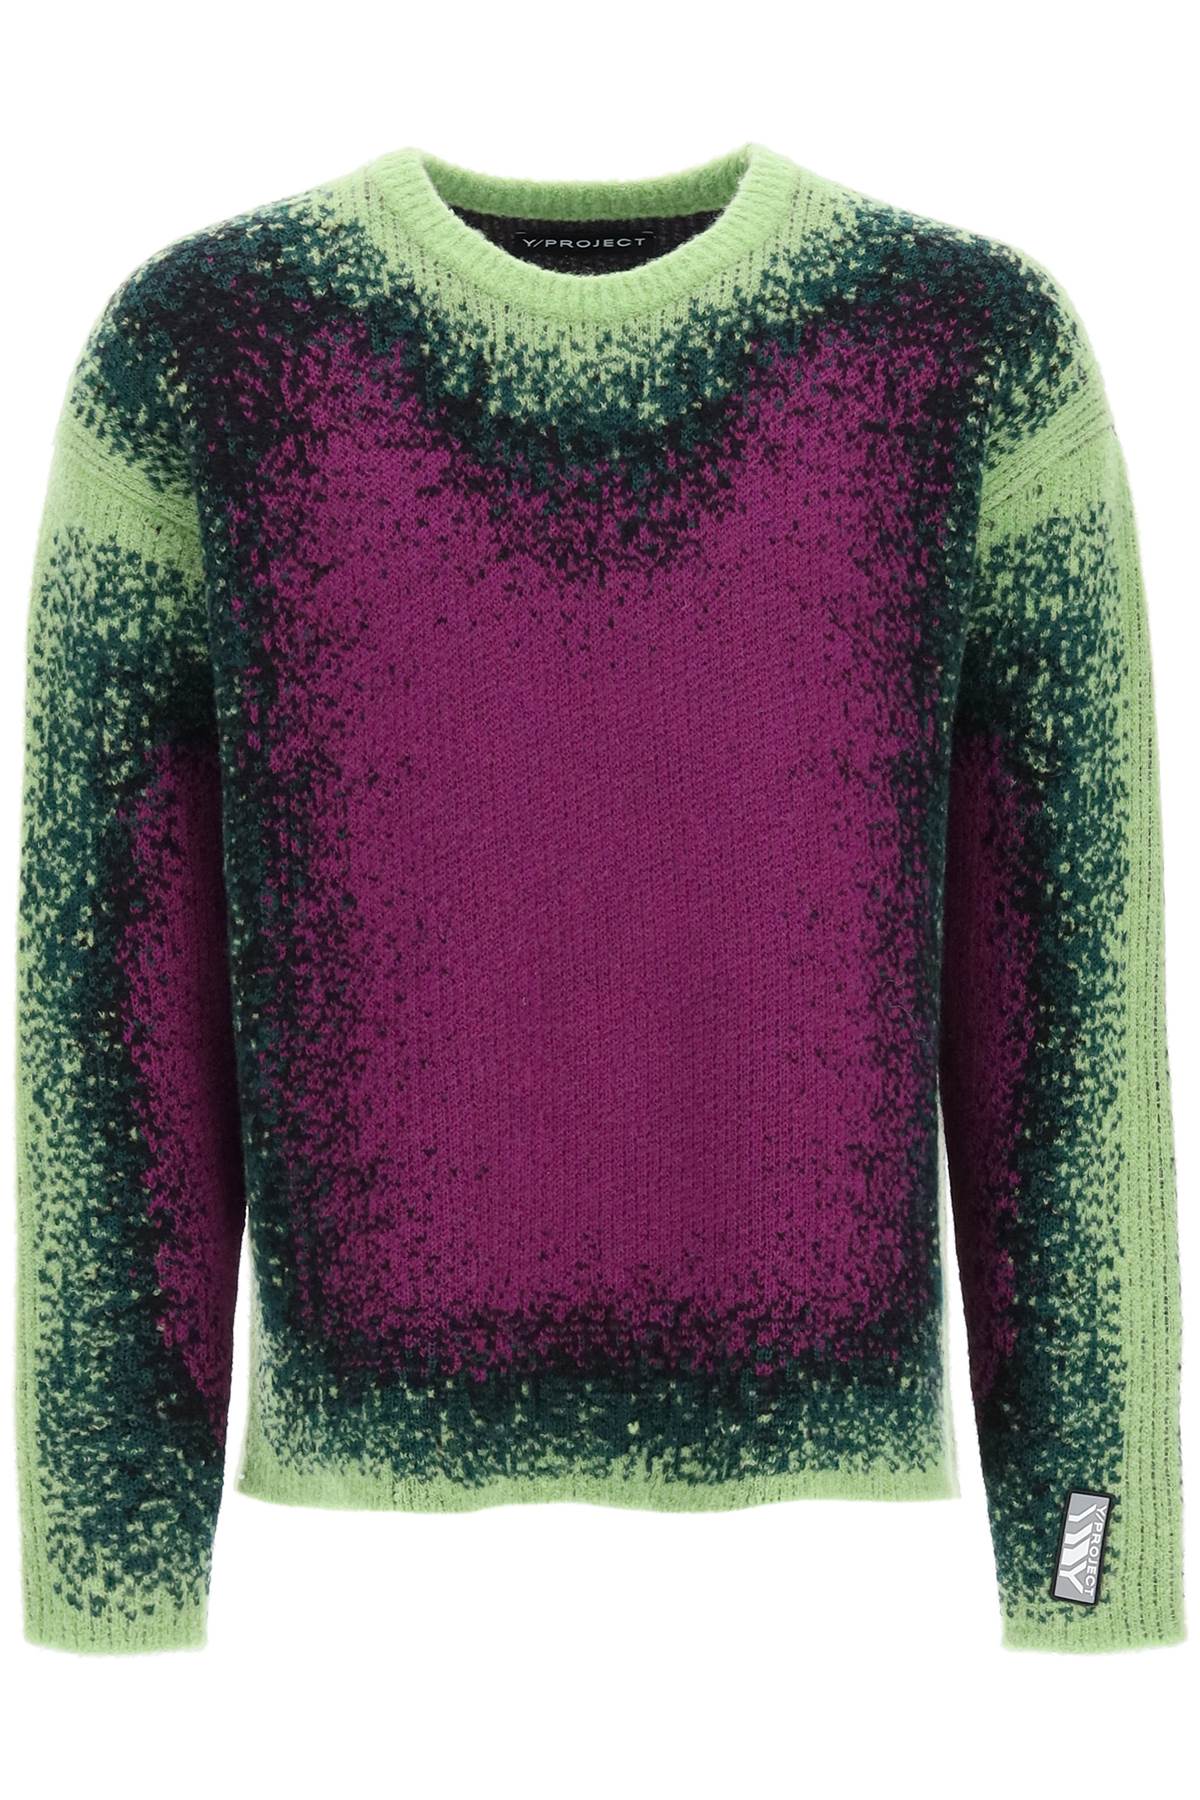 Y/PROJECT GRADIENT PRINT WOOL-BLEND SWEATER